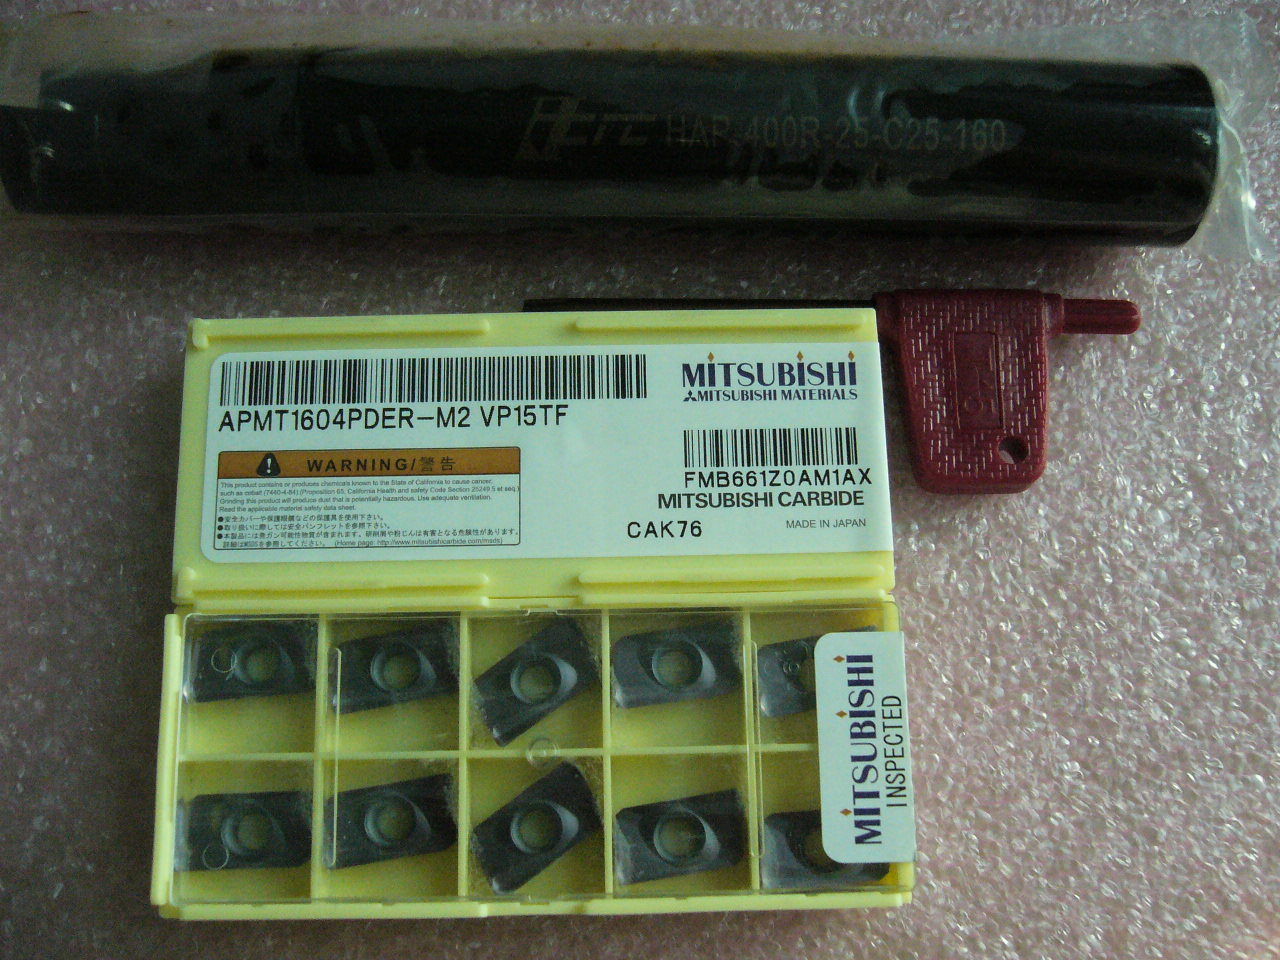 10x APMT1604PDER-M2 VP15TF Milling Inserts with TOOL HOLDER set - Click Image to Close